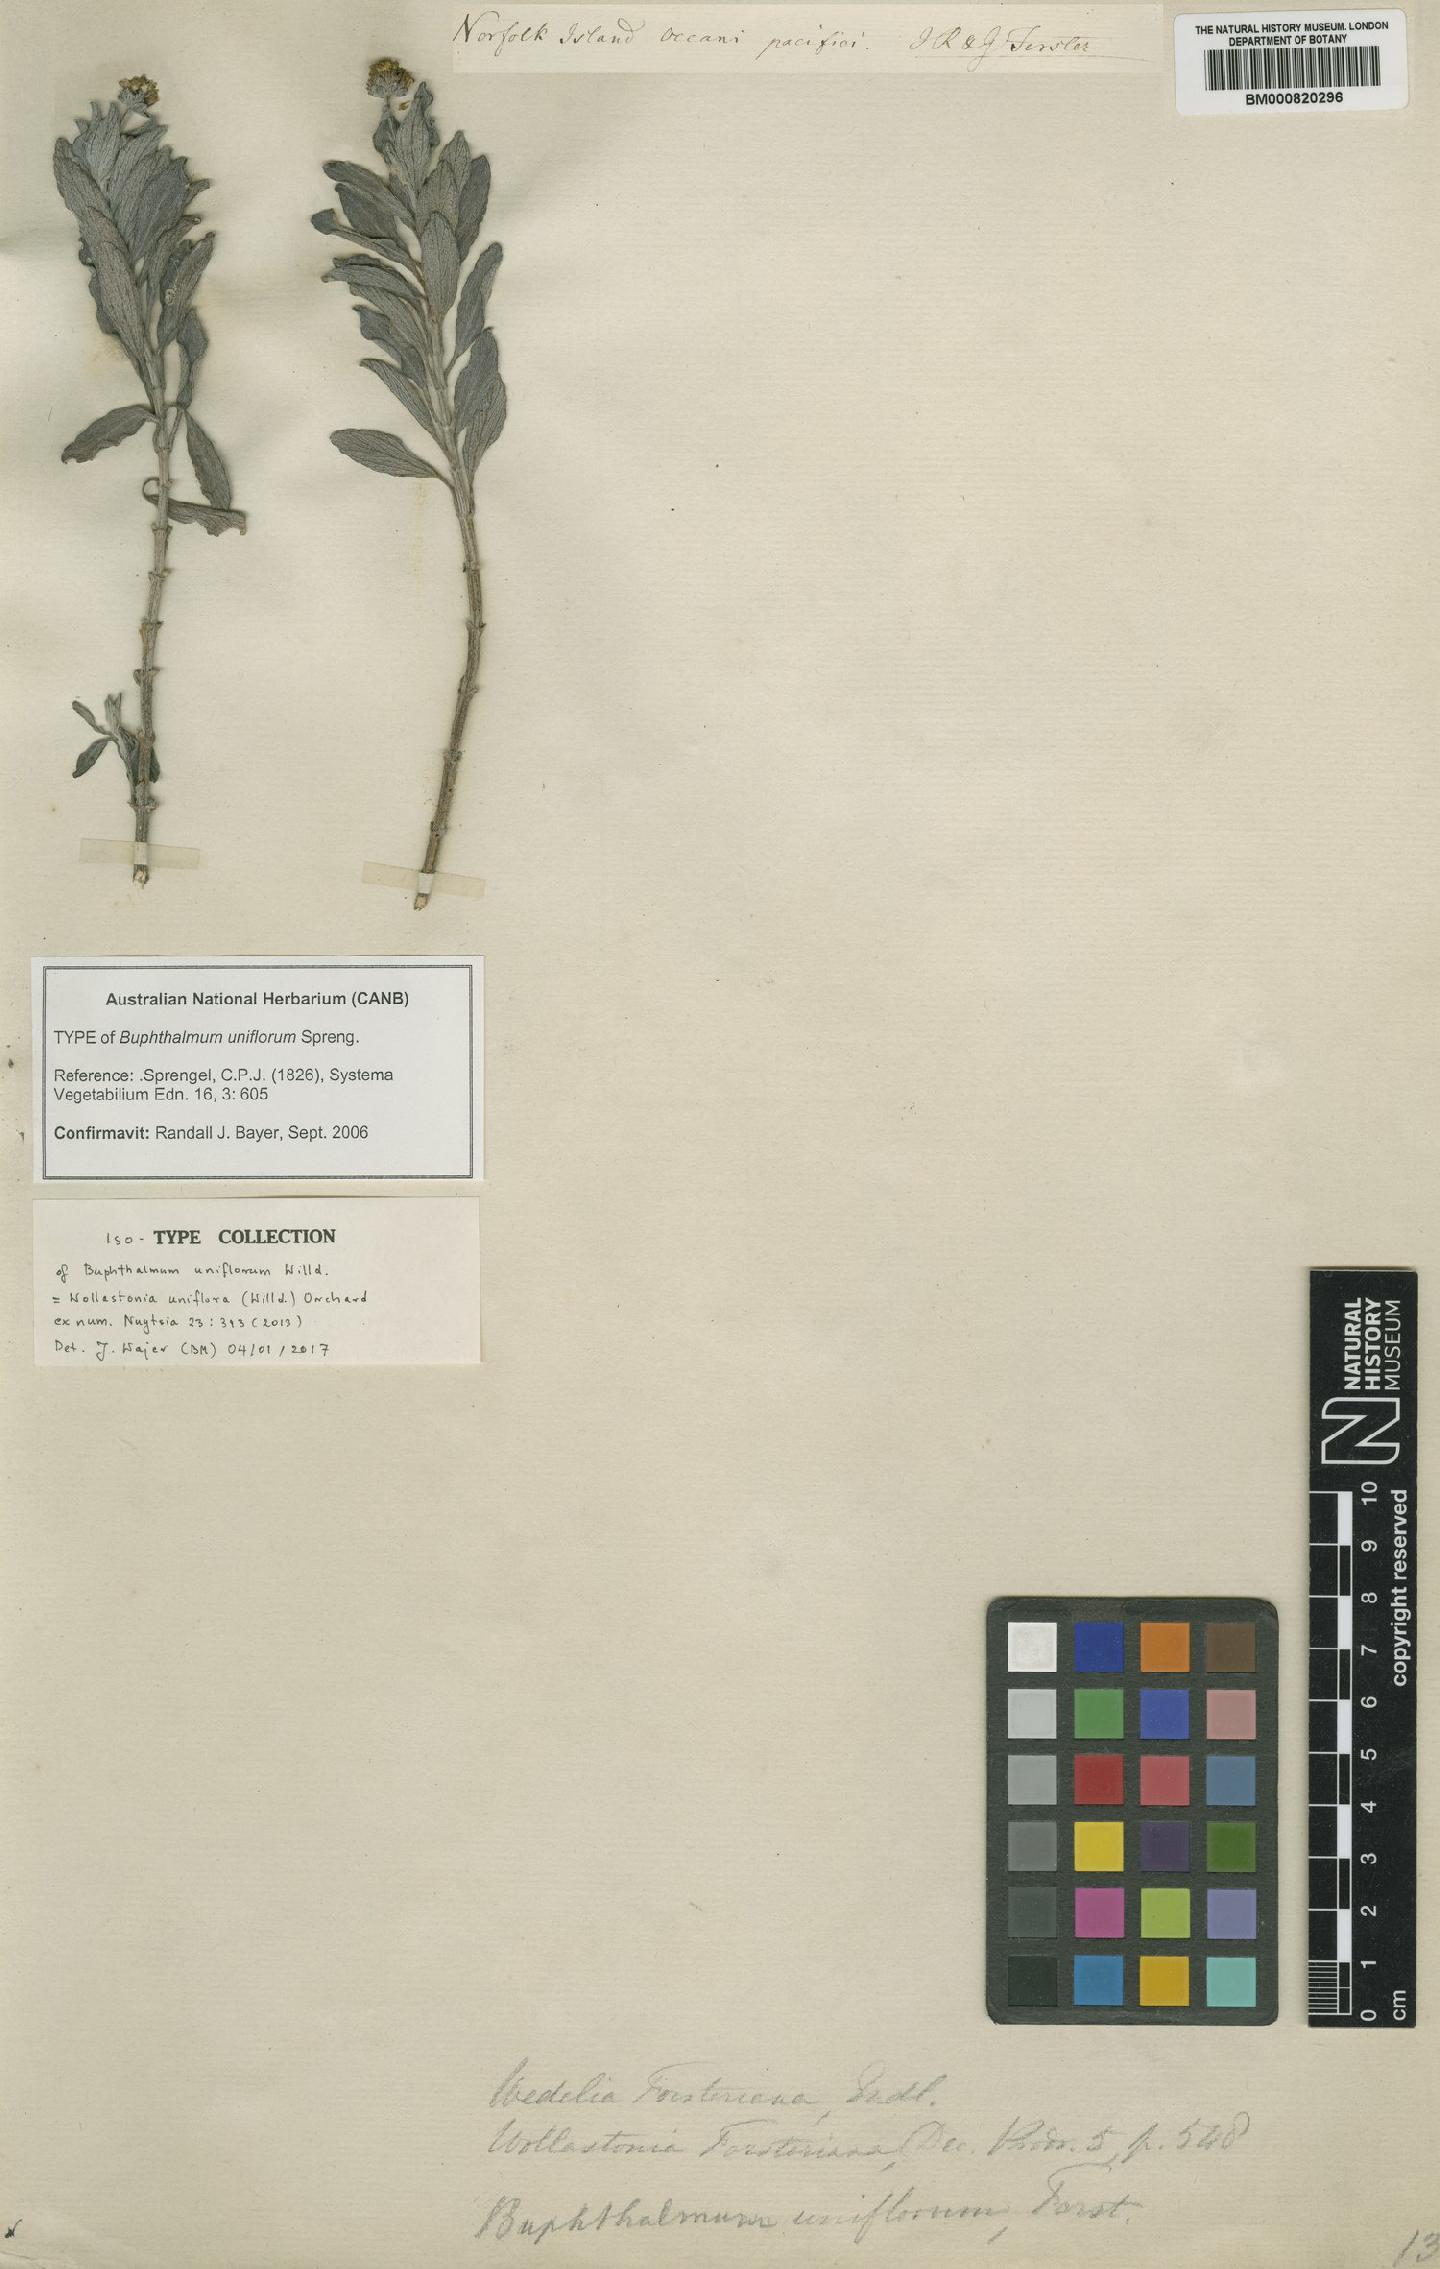 To NHMUK collection (Wollastonia uniflora (Willd.) Orchard; Isotype; NHMUK:ecatalogue:4969225)